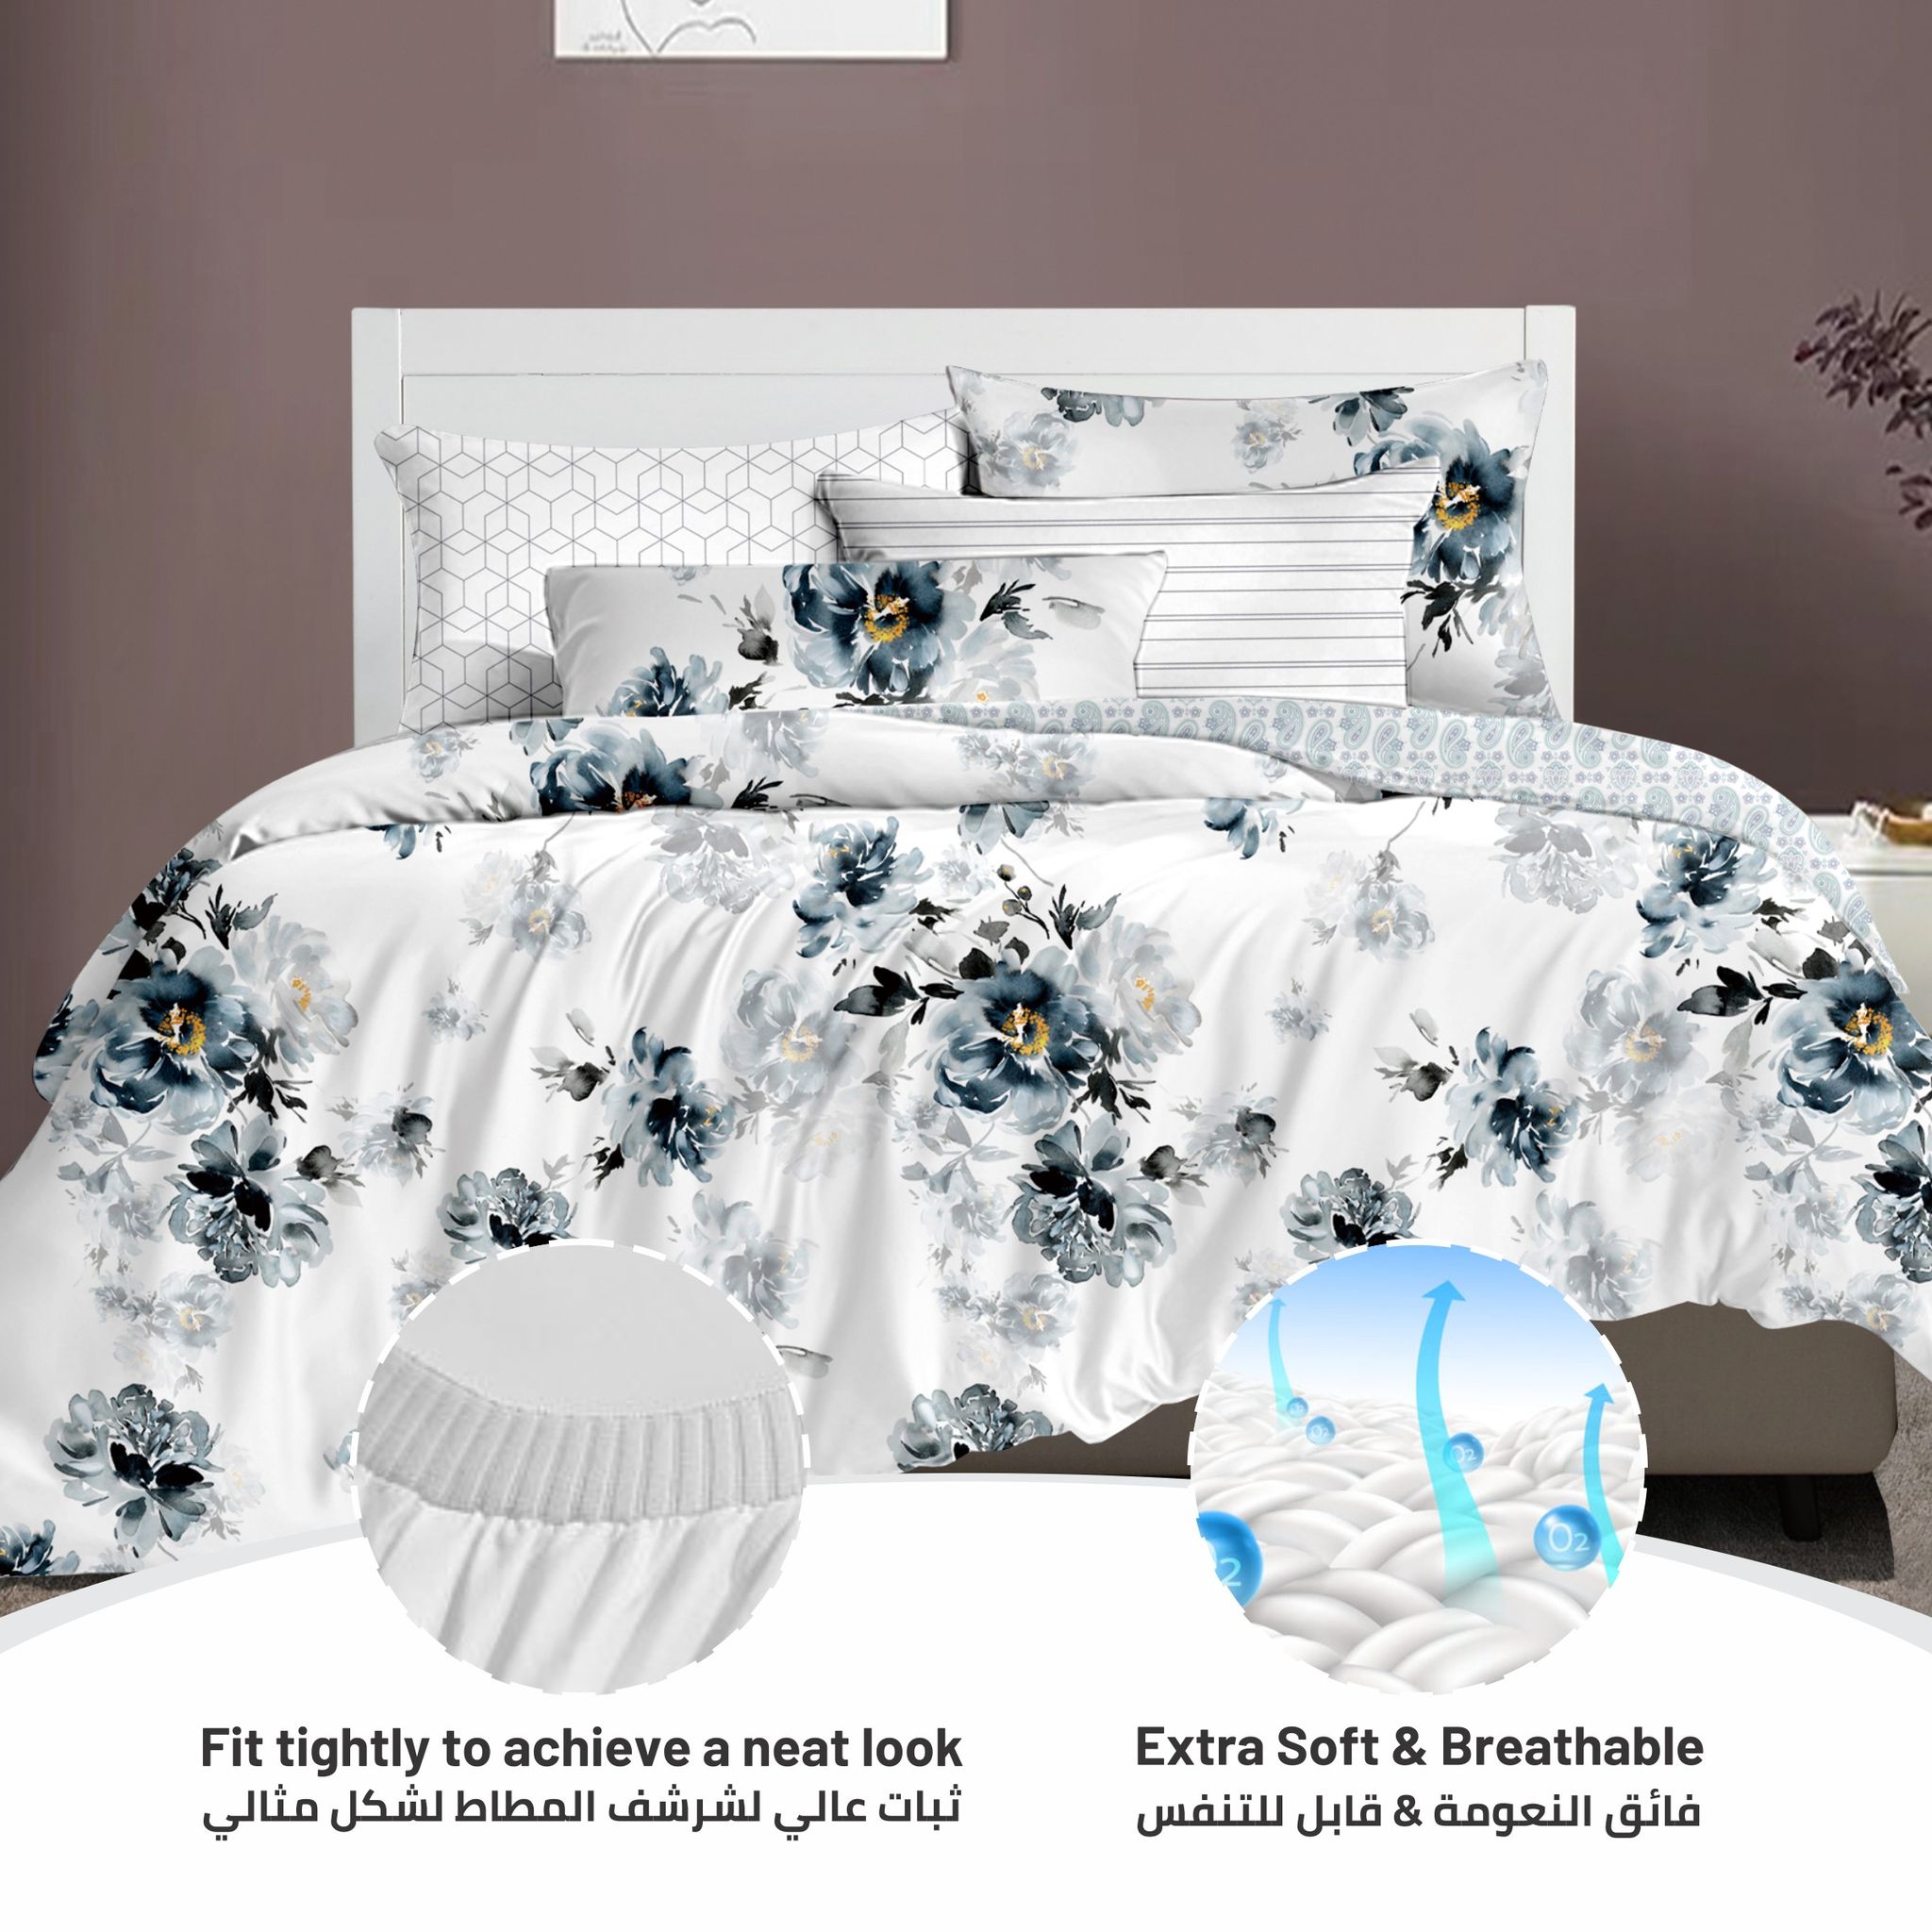 Printed Comforter Set 6-Pcs King Size All Season Decorated Reversible Double Bed Comforter Set With Super-Soft Down Alterntaive Filing,Silver